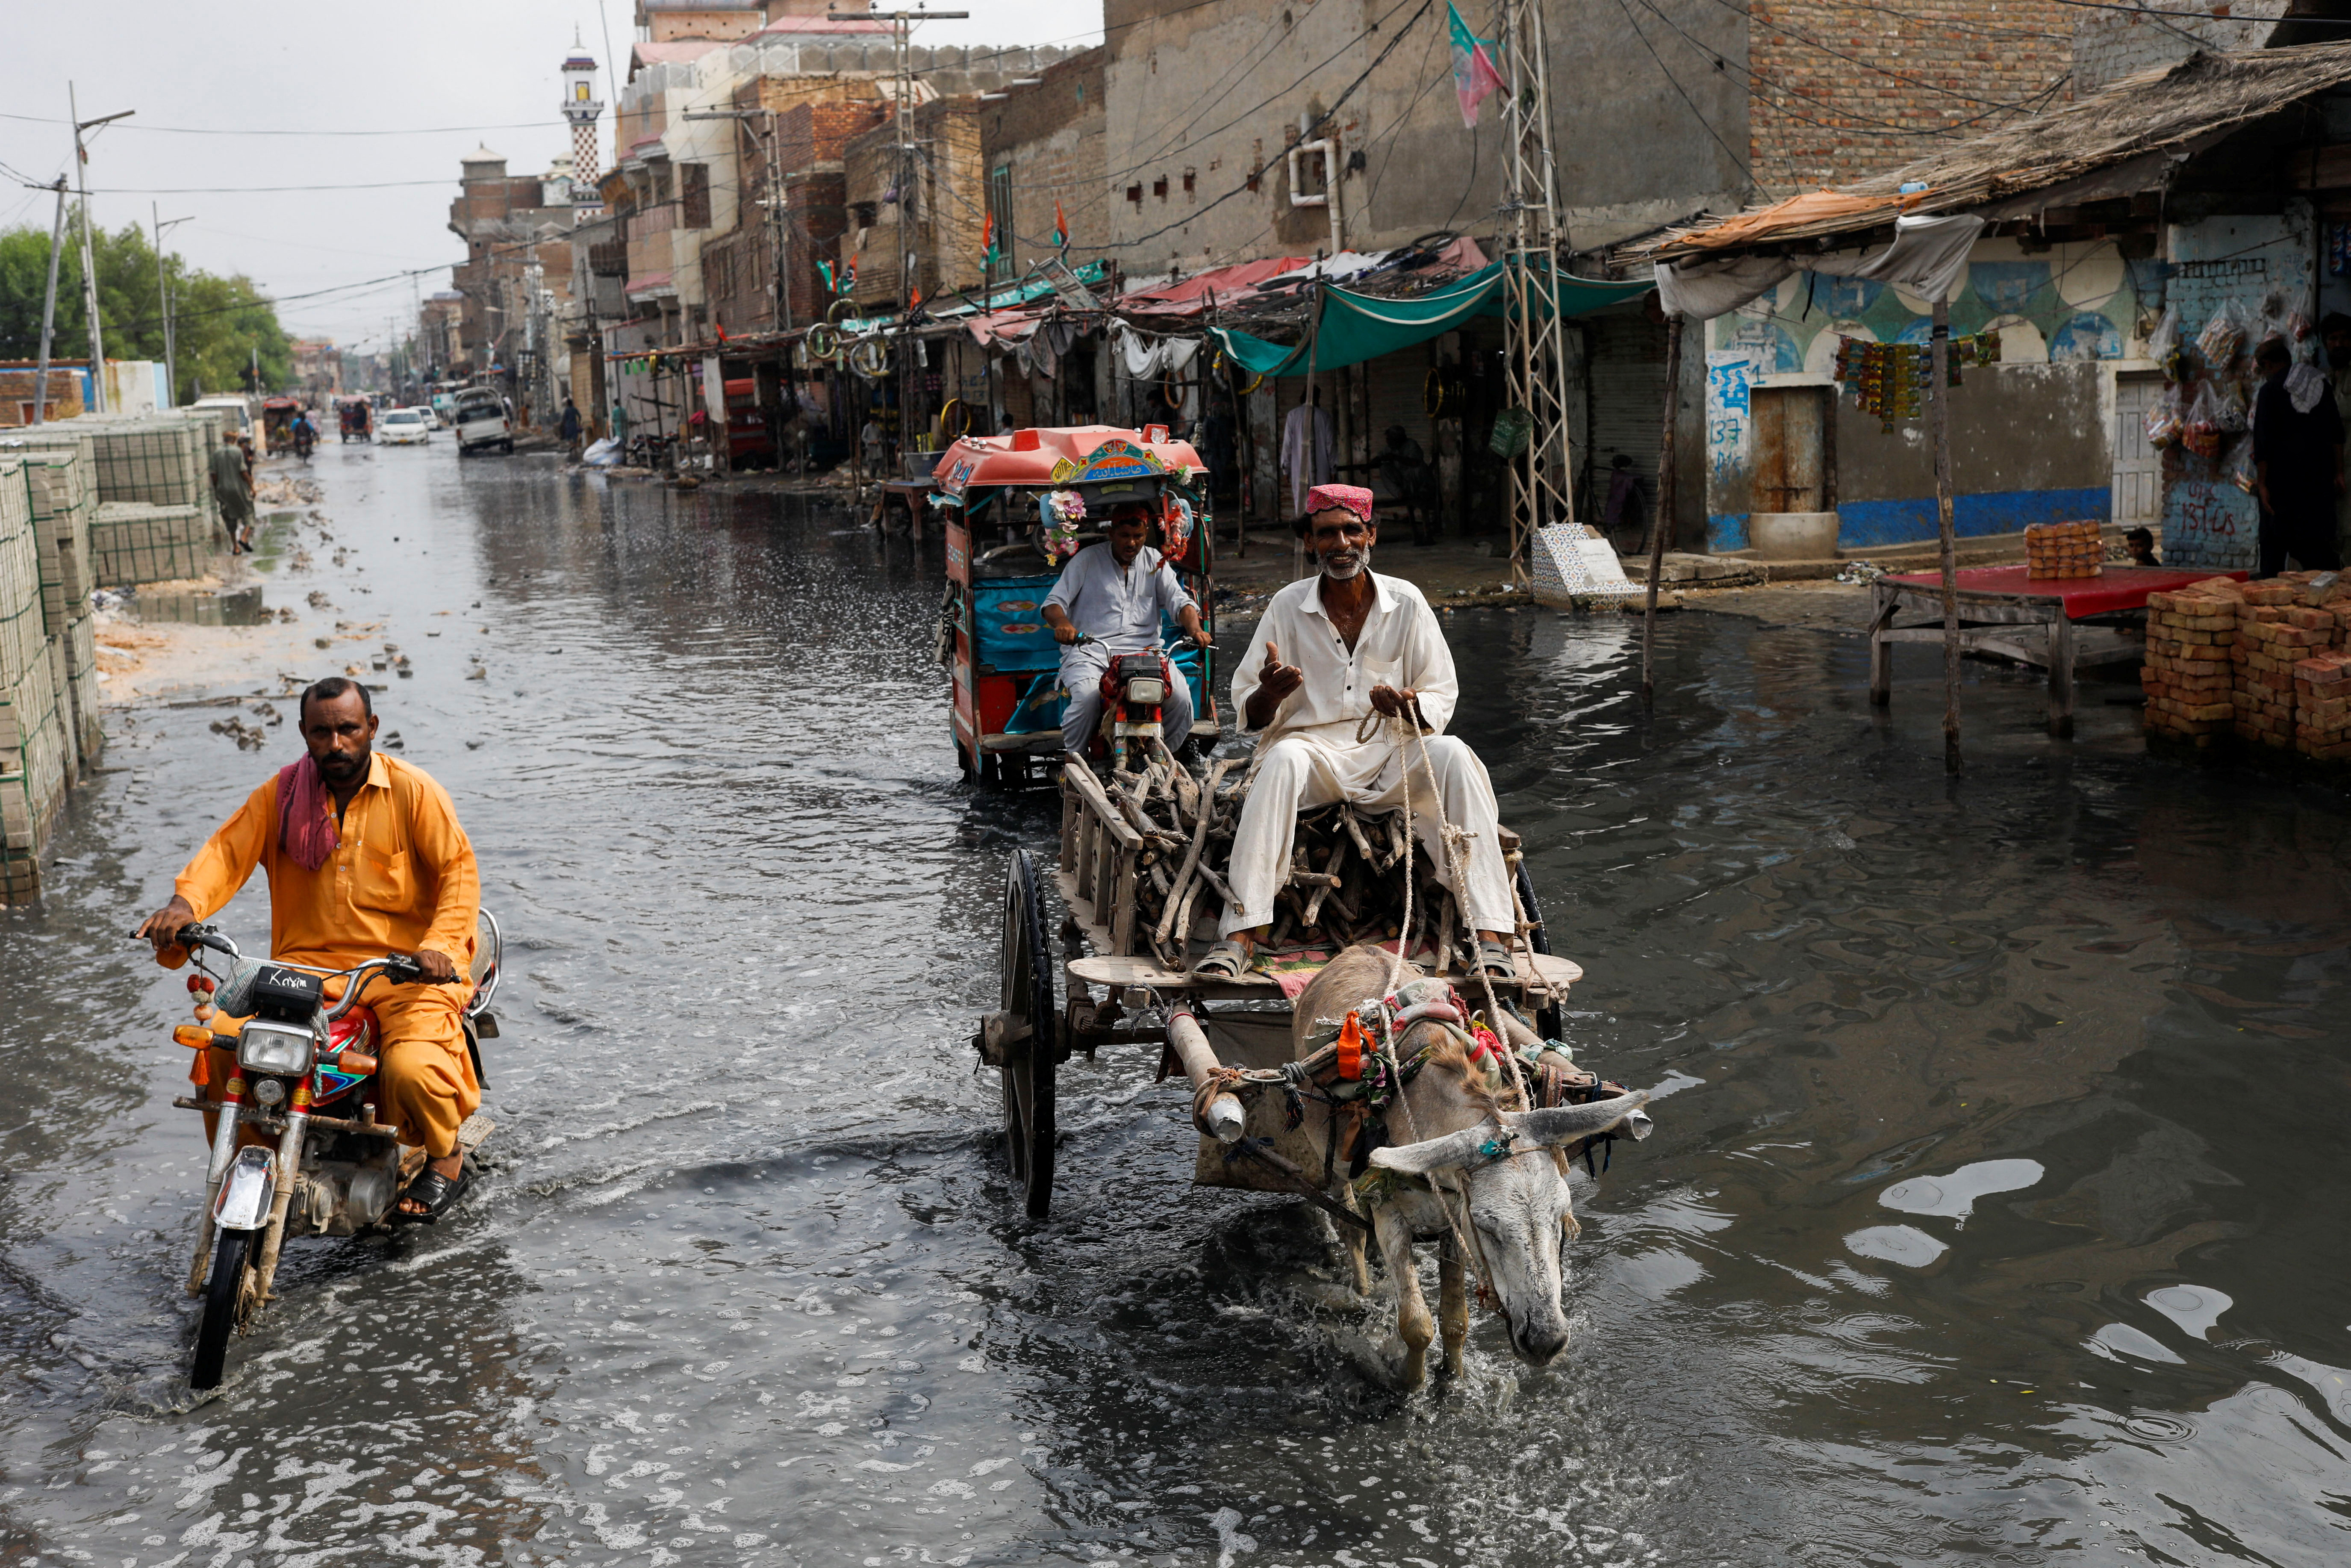 A man rides on donkey cart through rain waters, following rains and floods during the monsoon season in Jacobabad